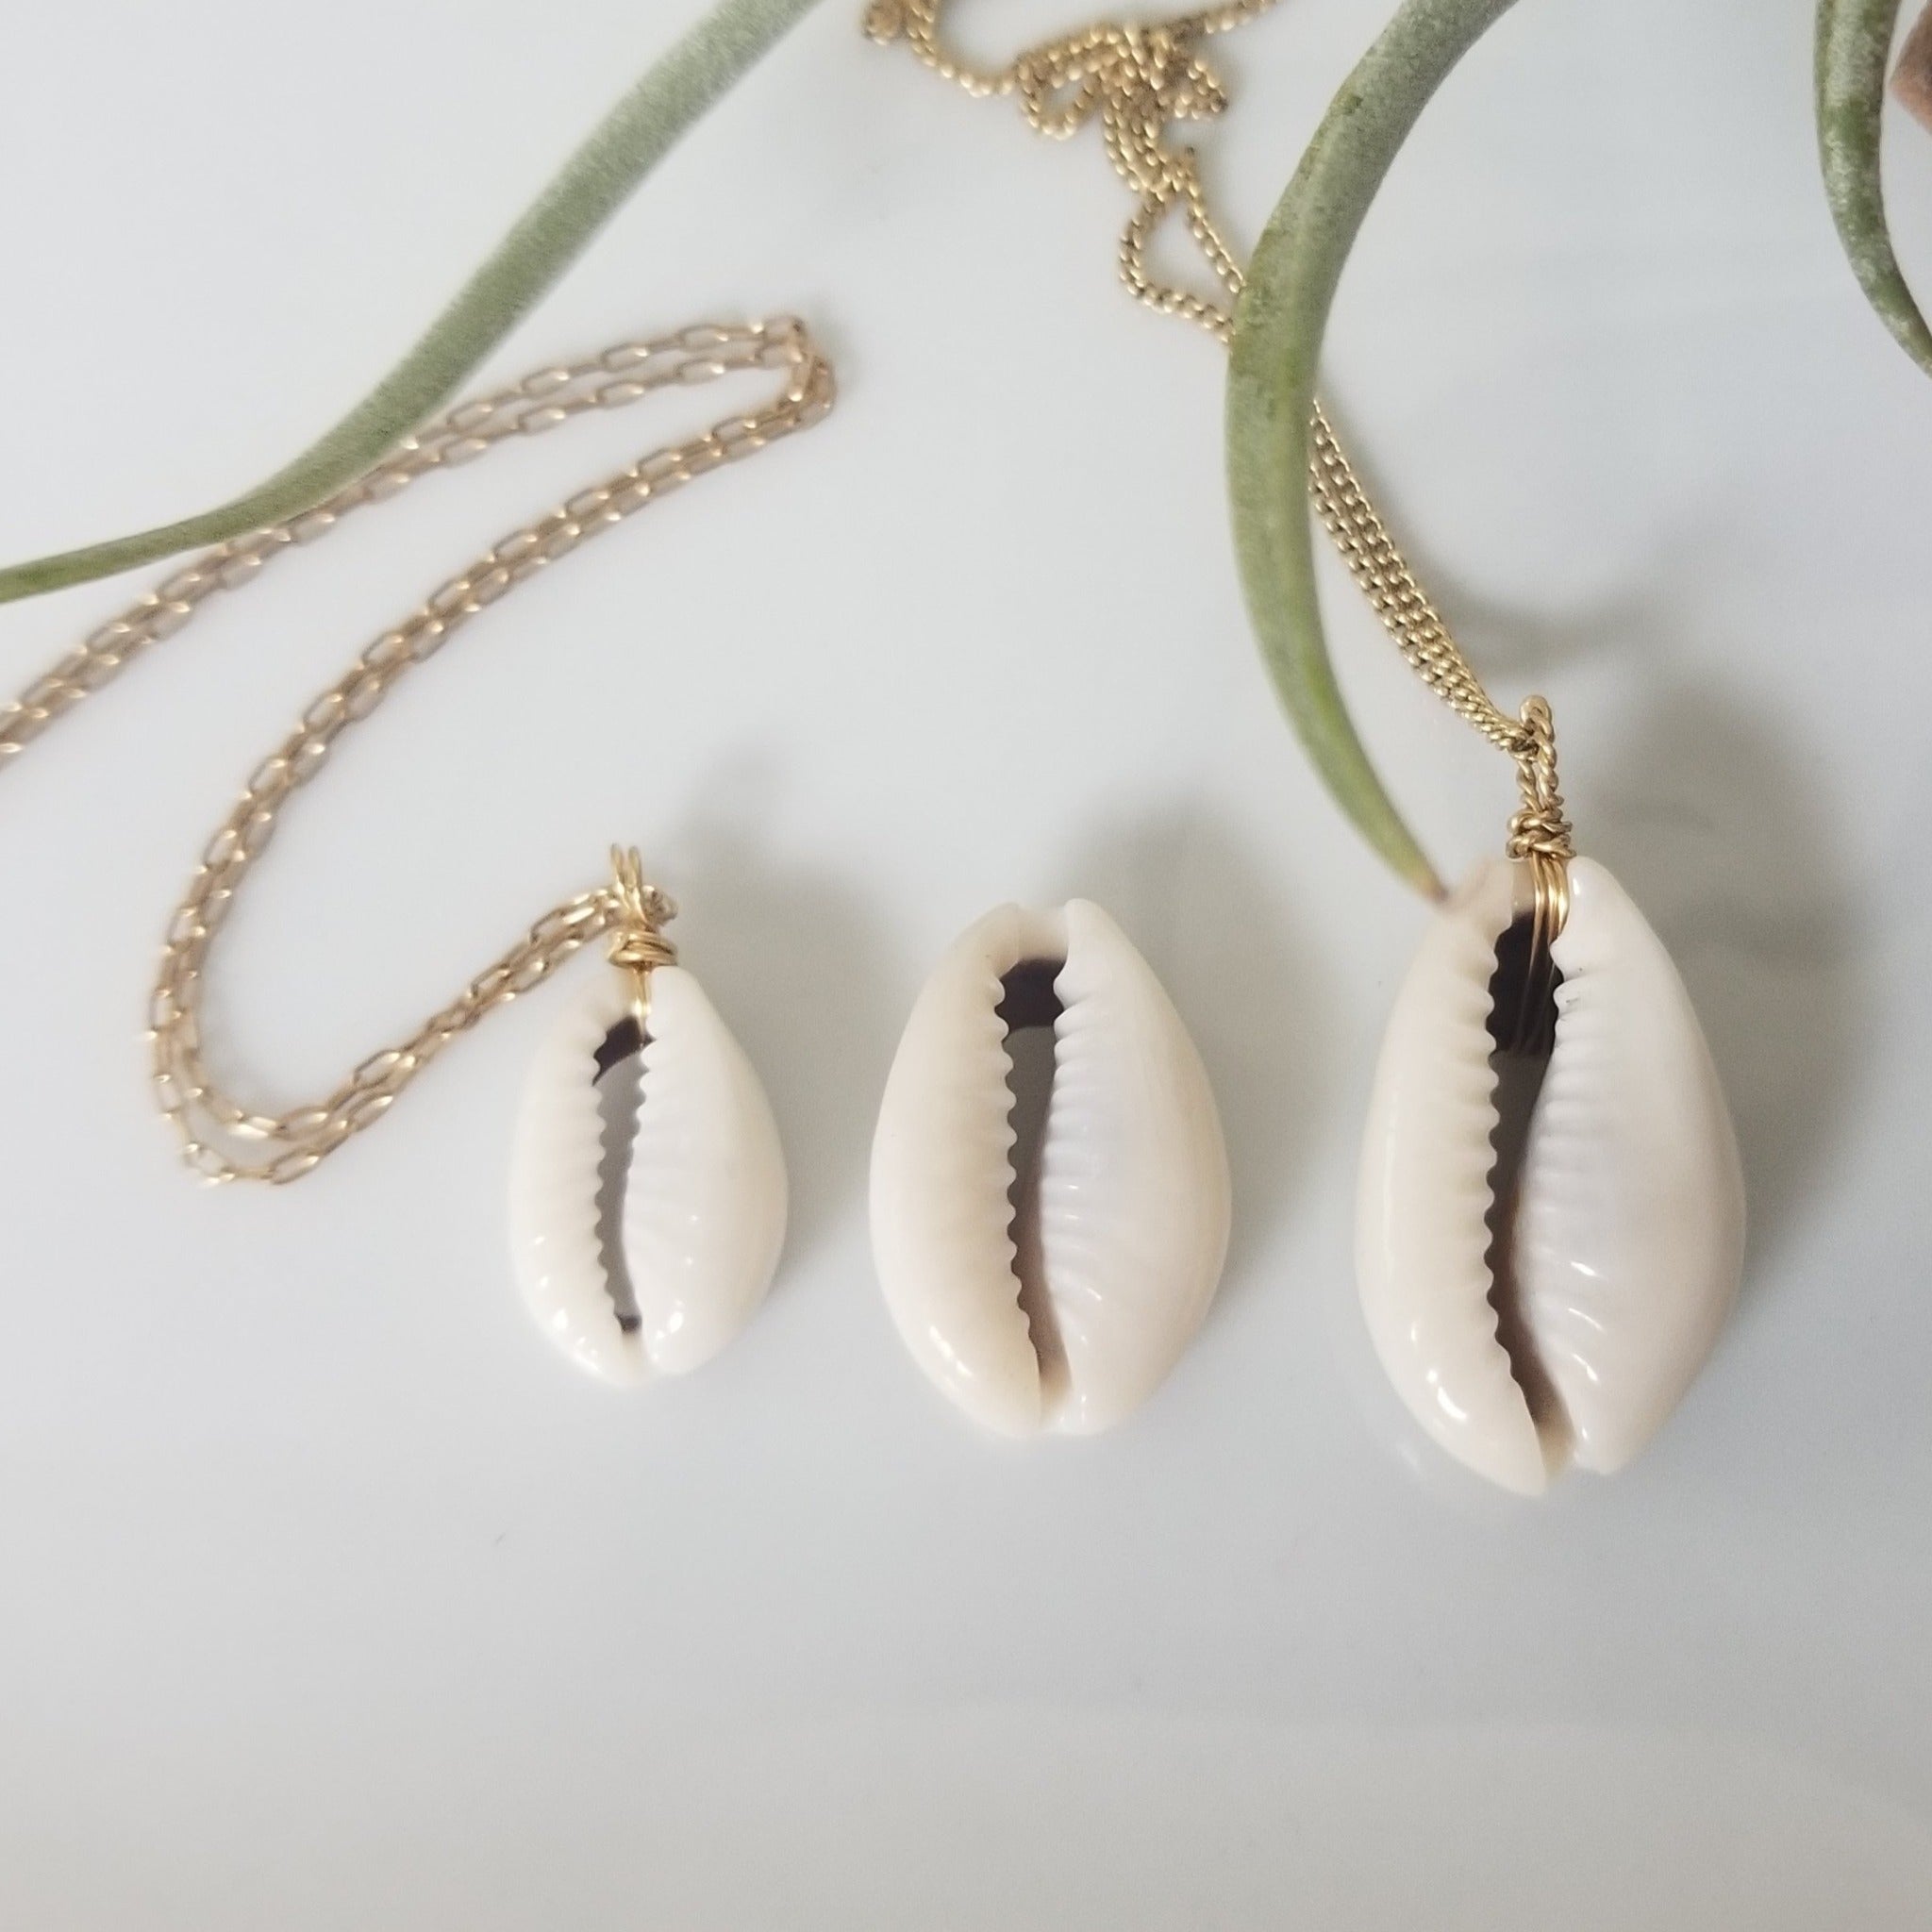 Natural Cowrie Shell Necklace - Small, Med, or Large - Sterling or Gold